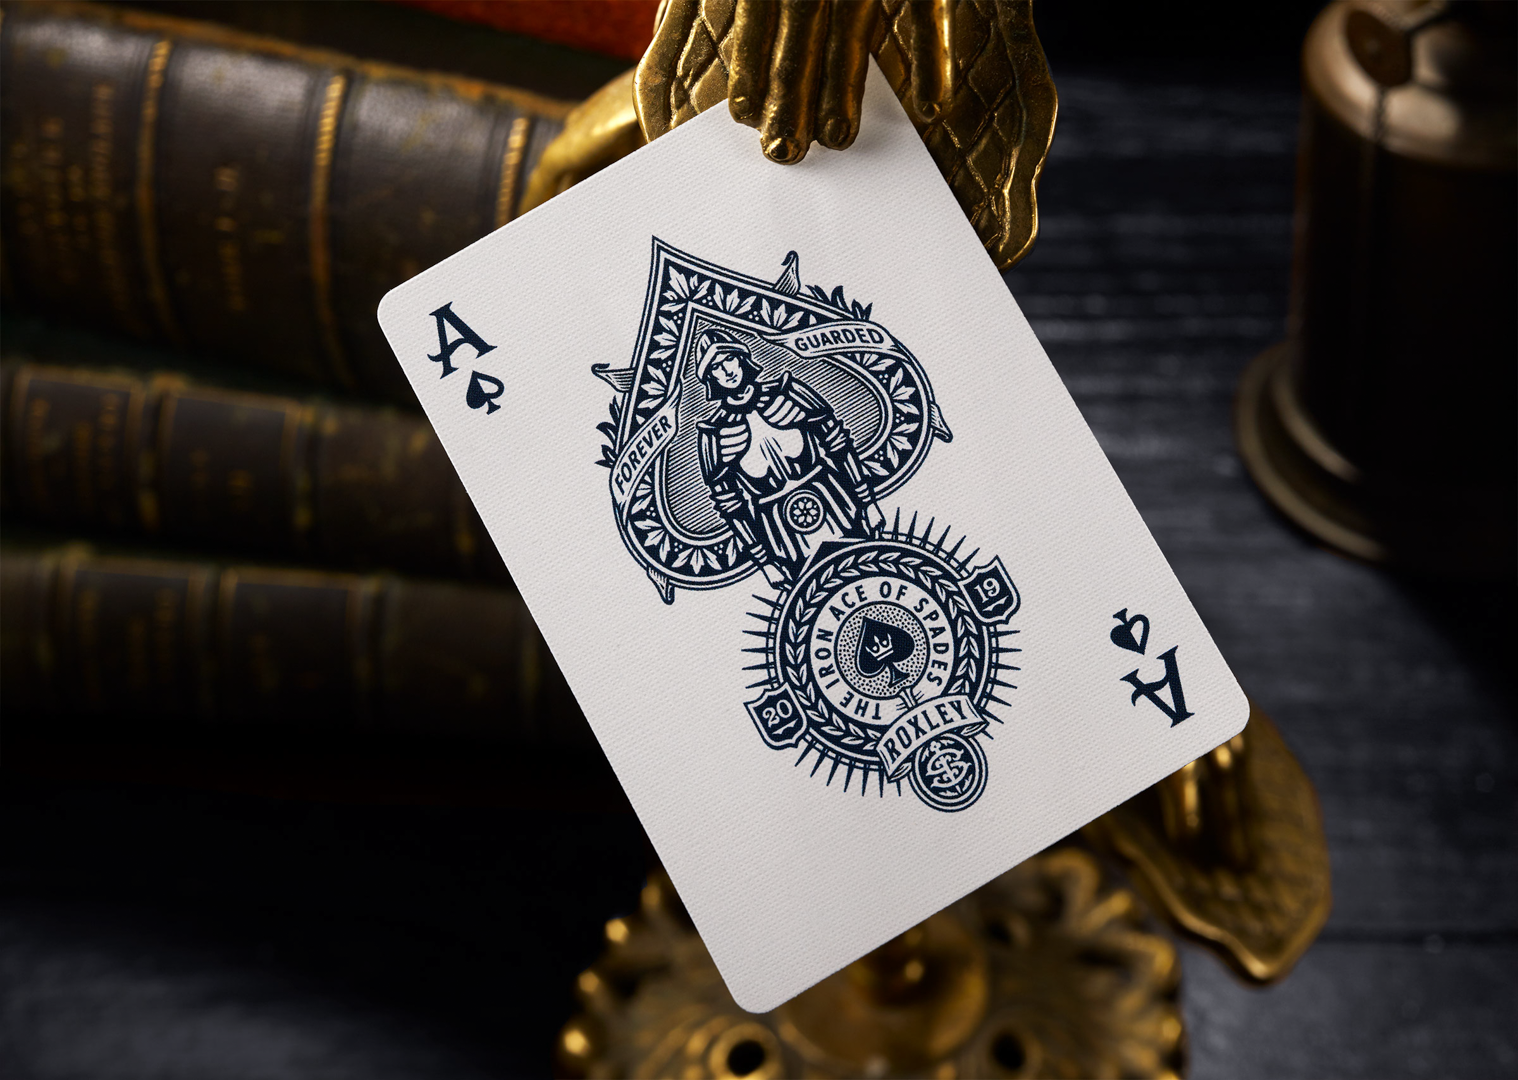 Iron Spades Playing Cards